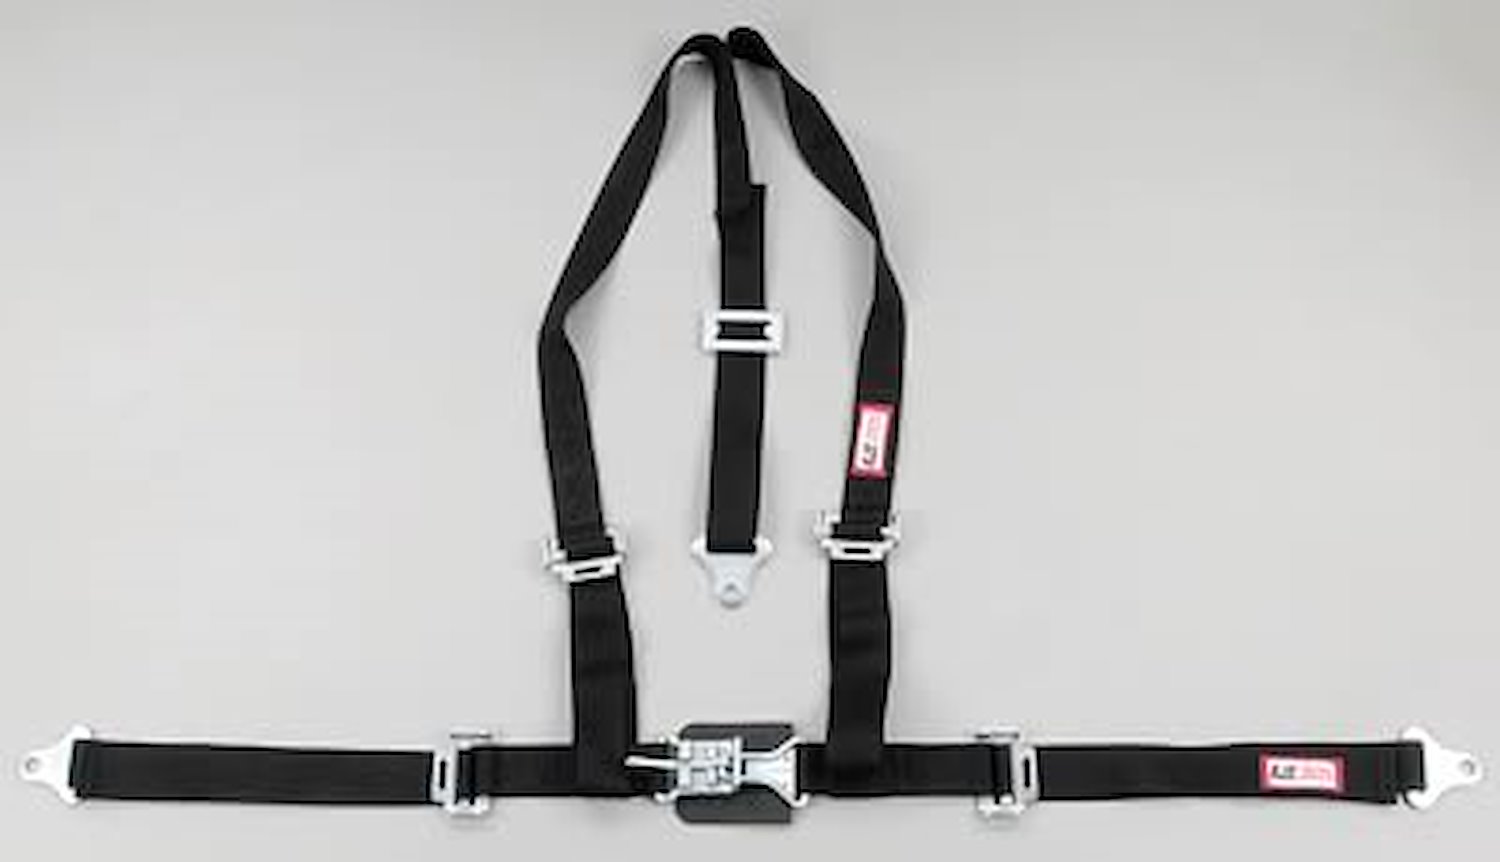 NON-SFI L&L HARNESS 2 PULL DOWN Lap Belt w/Adjuster 2 S.H. Individual FLOOR MOUNT w/STERNUM STRAP ALL WRAP ENDS RED